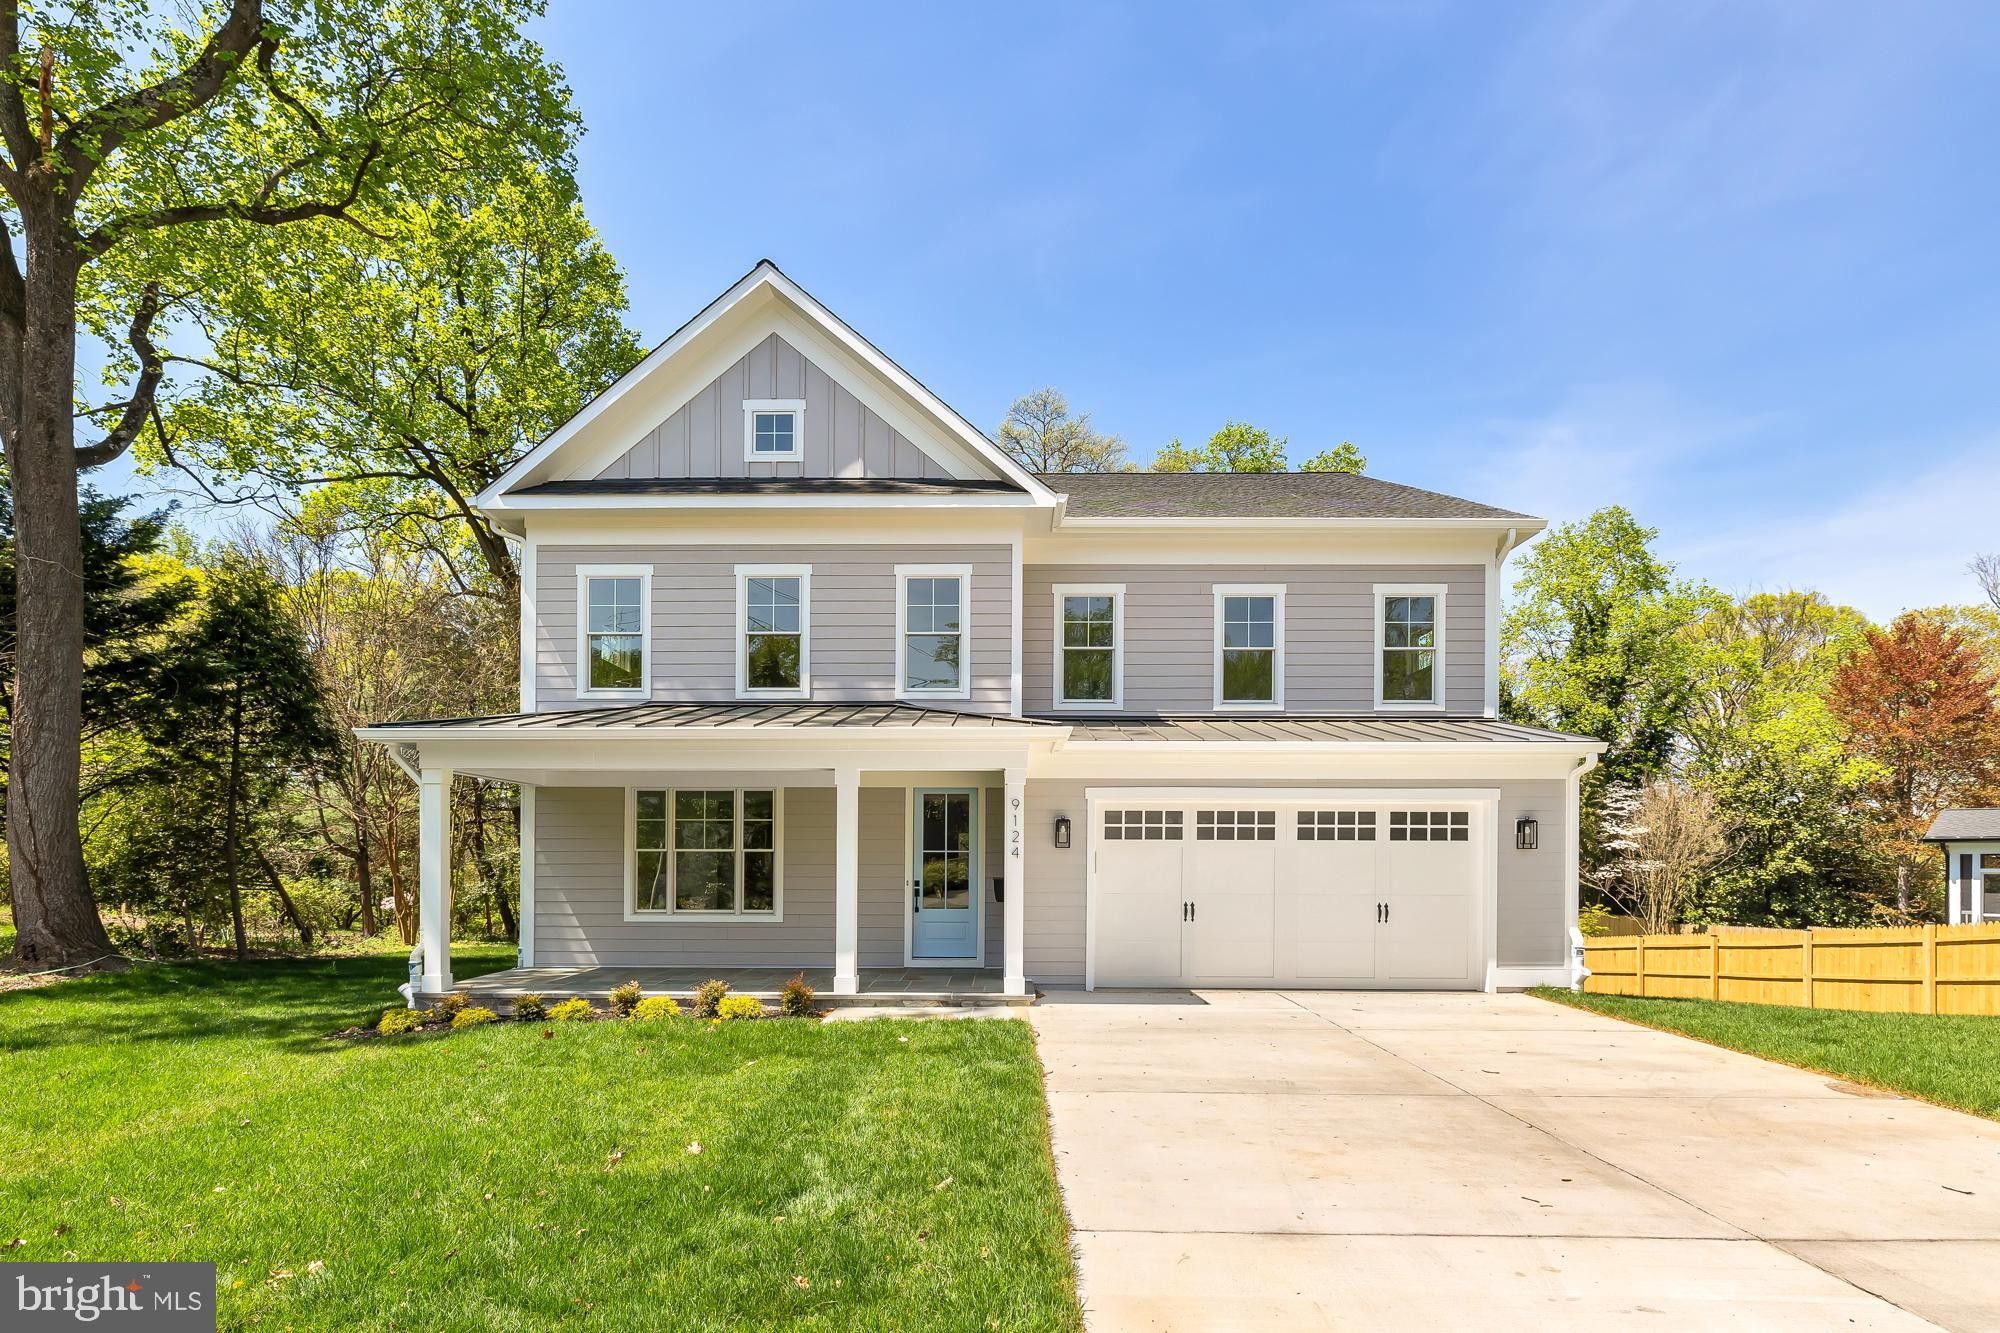 9124 Le Velle Drive. Chevy Chase, MD 20815